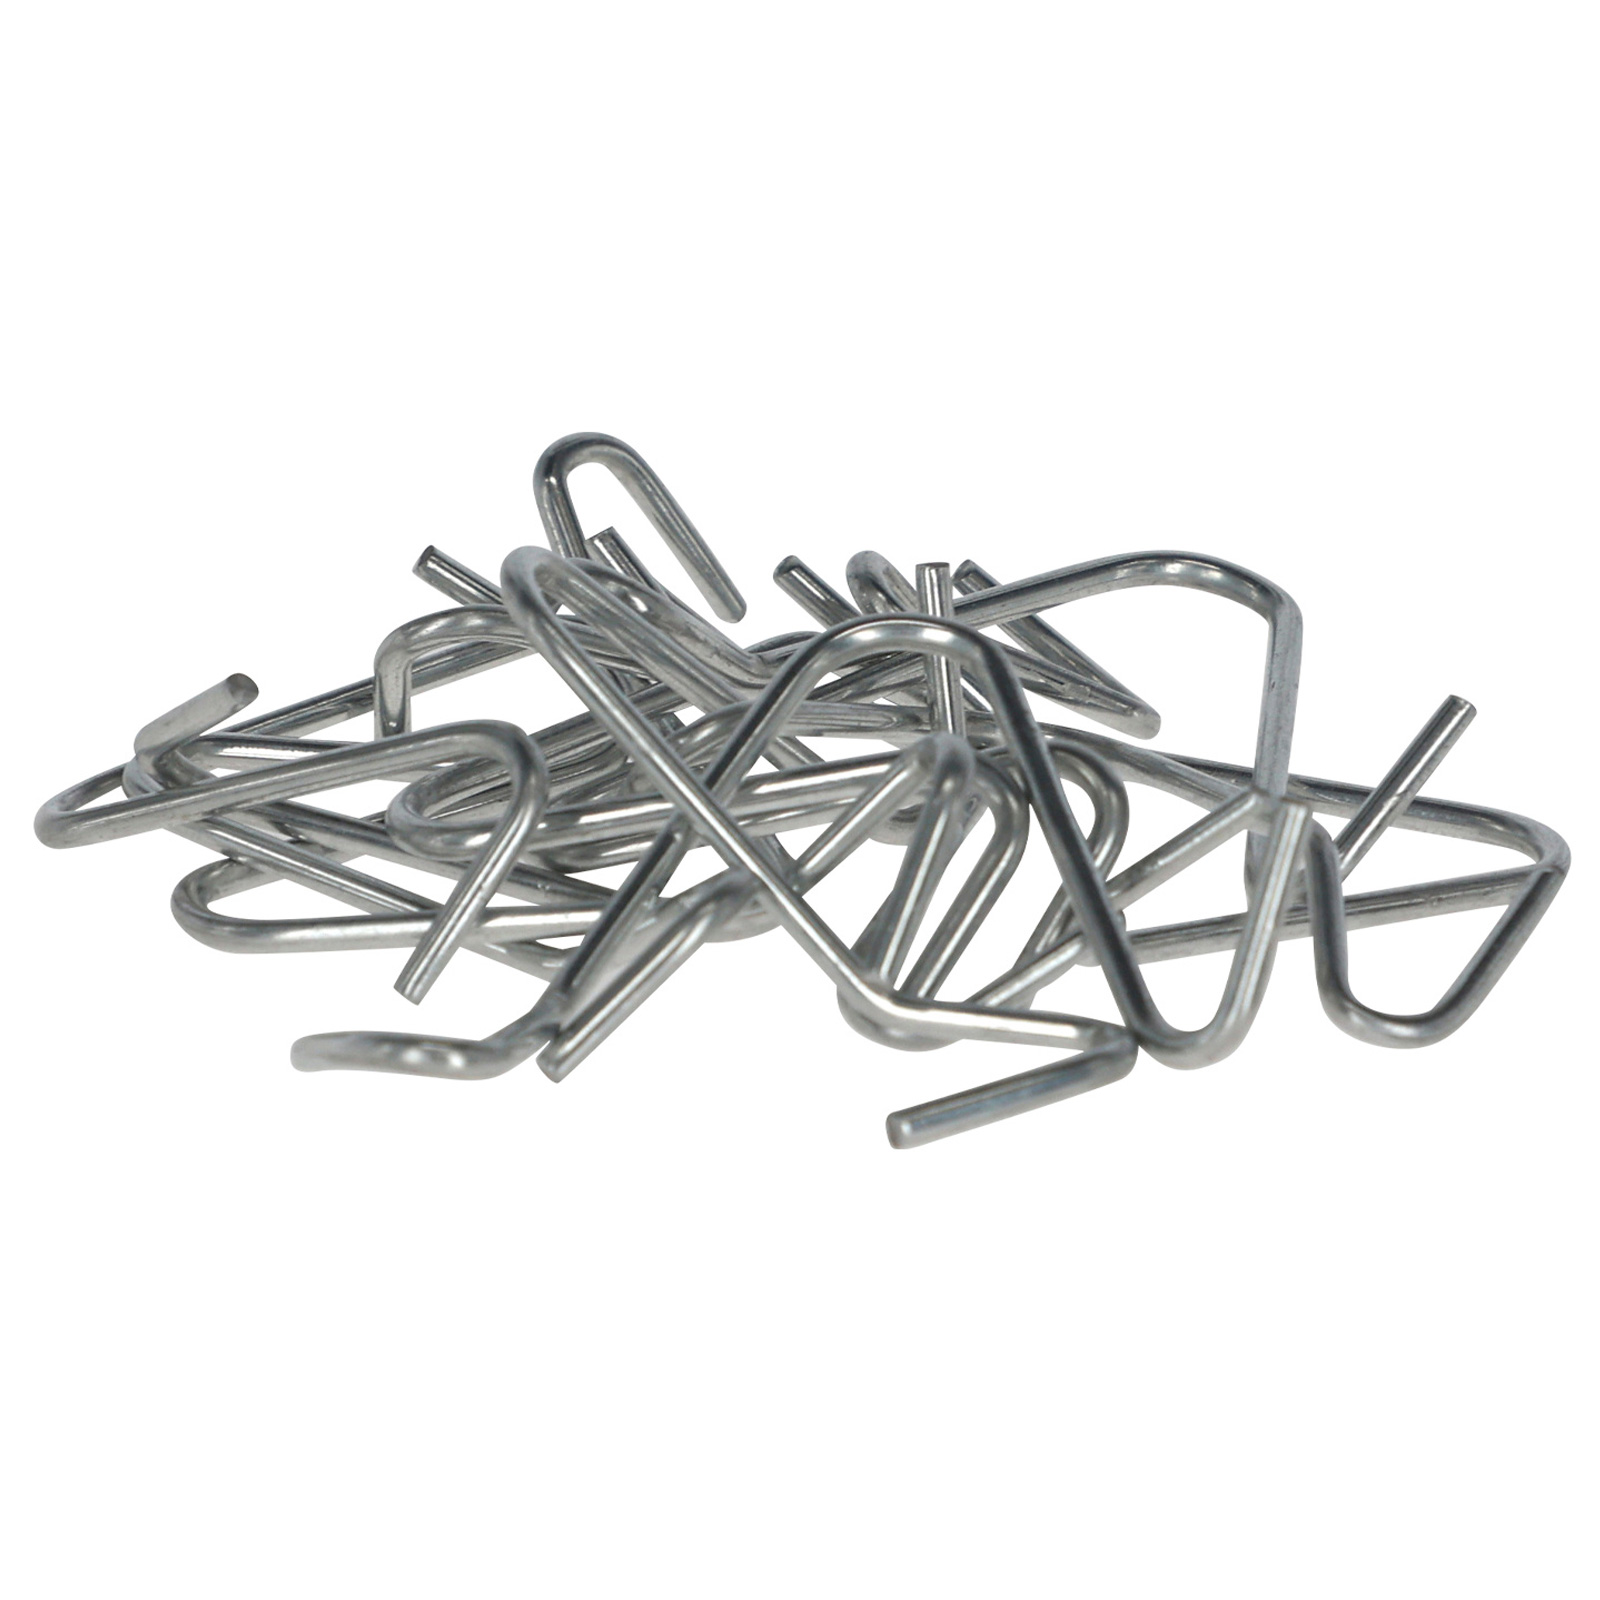 25x Fixing Clips for T-Post Pale cheap online